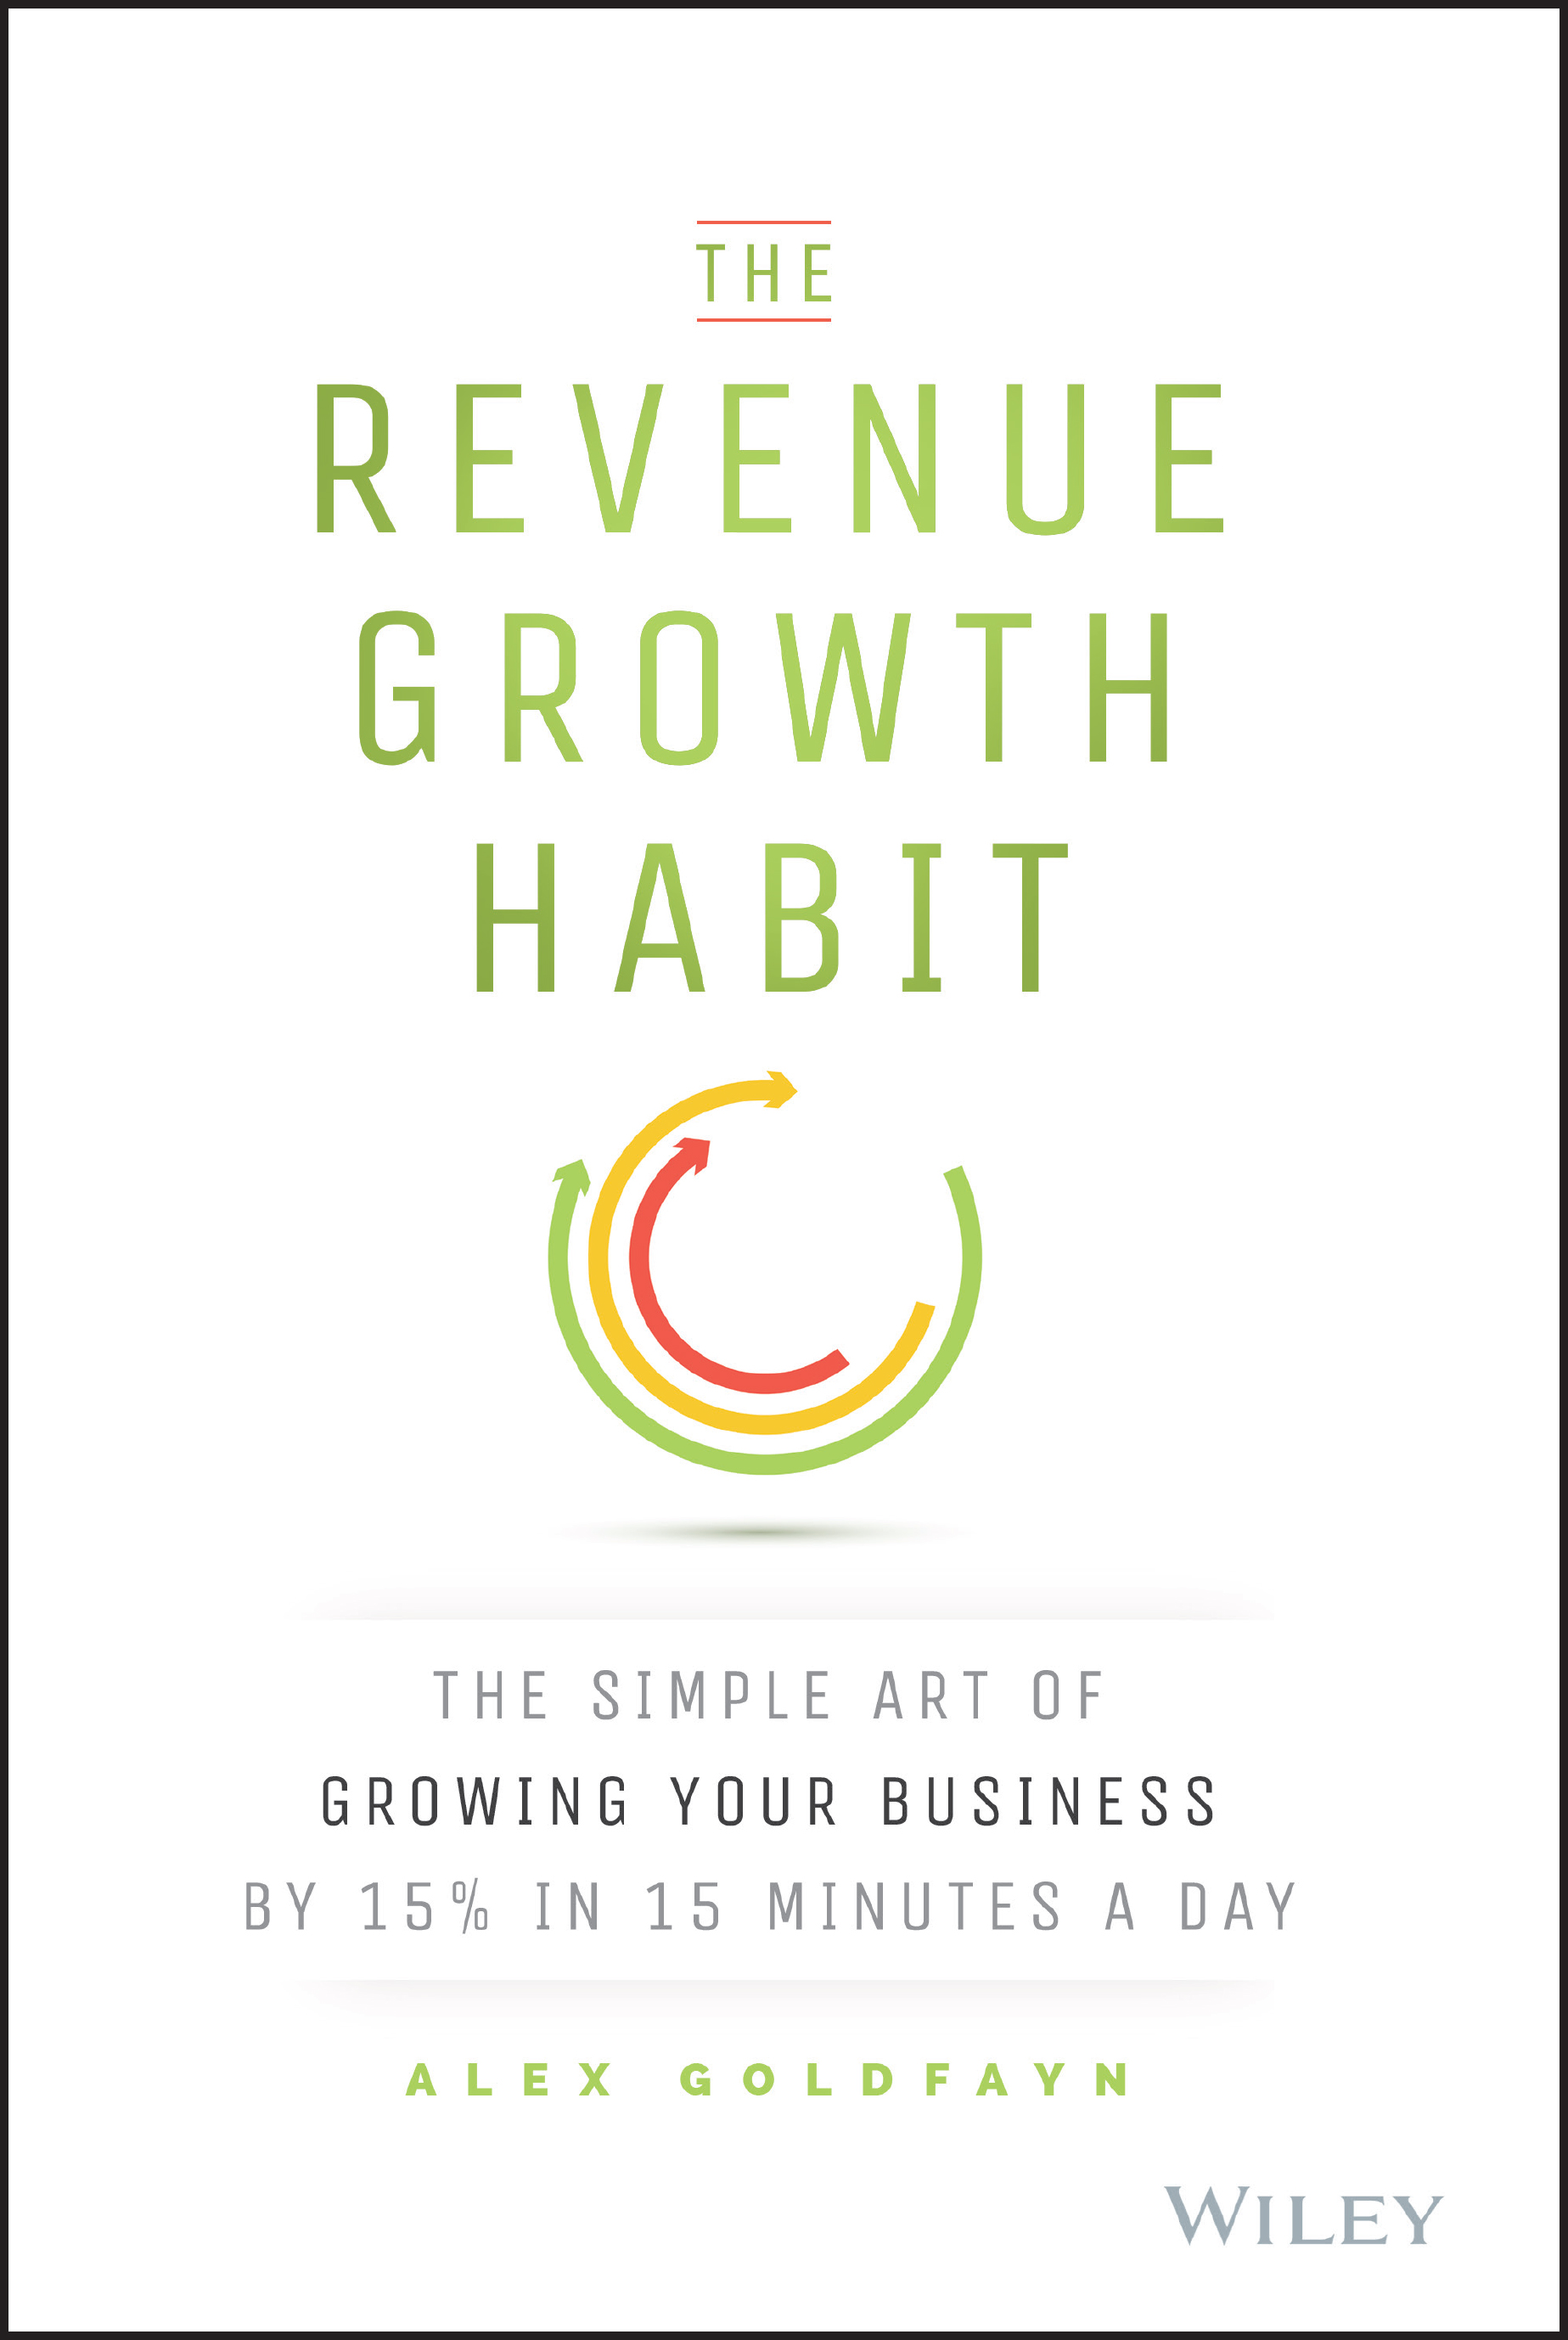 The-Revenue-Growth-Habit--The-Simple-Art-of-Growing-Your-Business-by-15%-in-15-Minutes-Per-Day